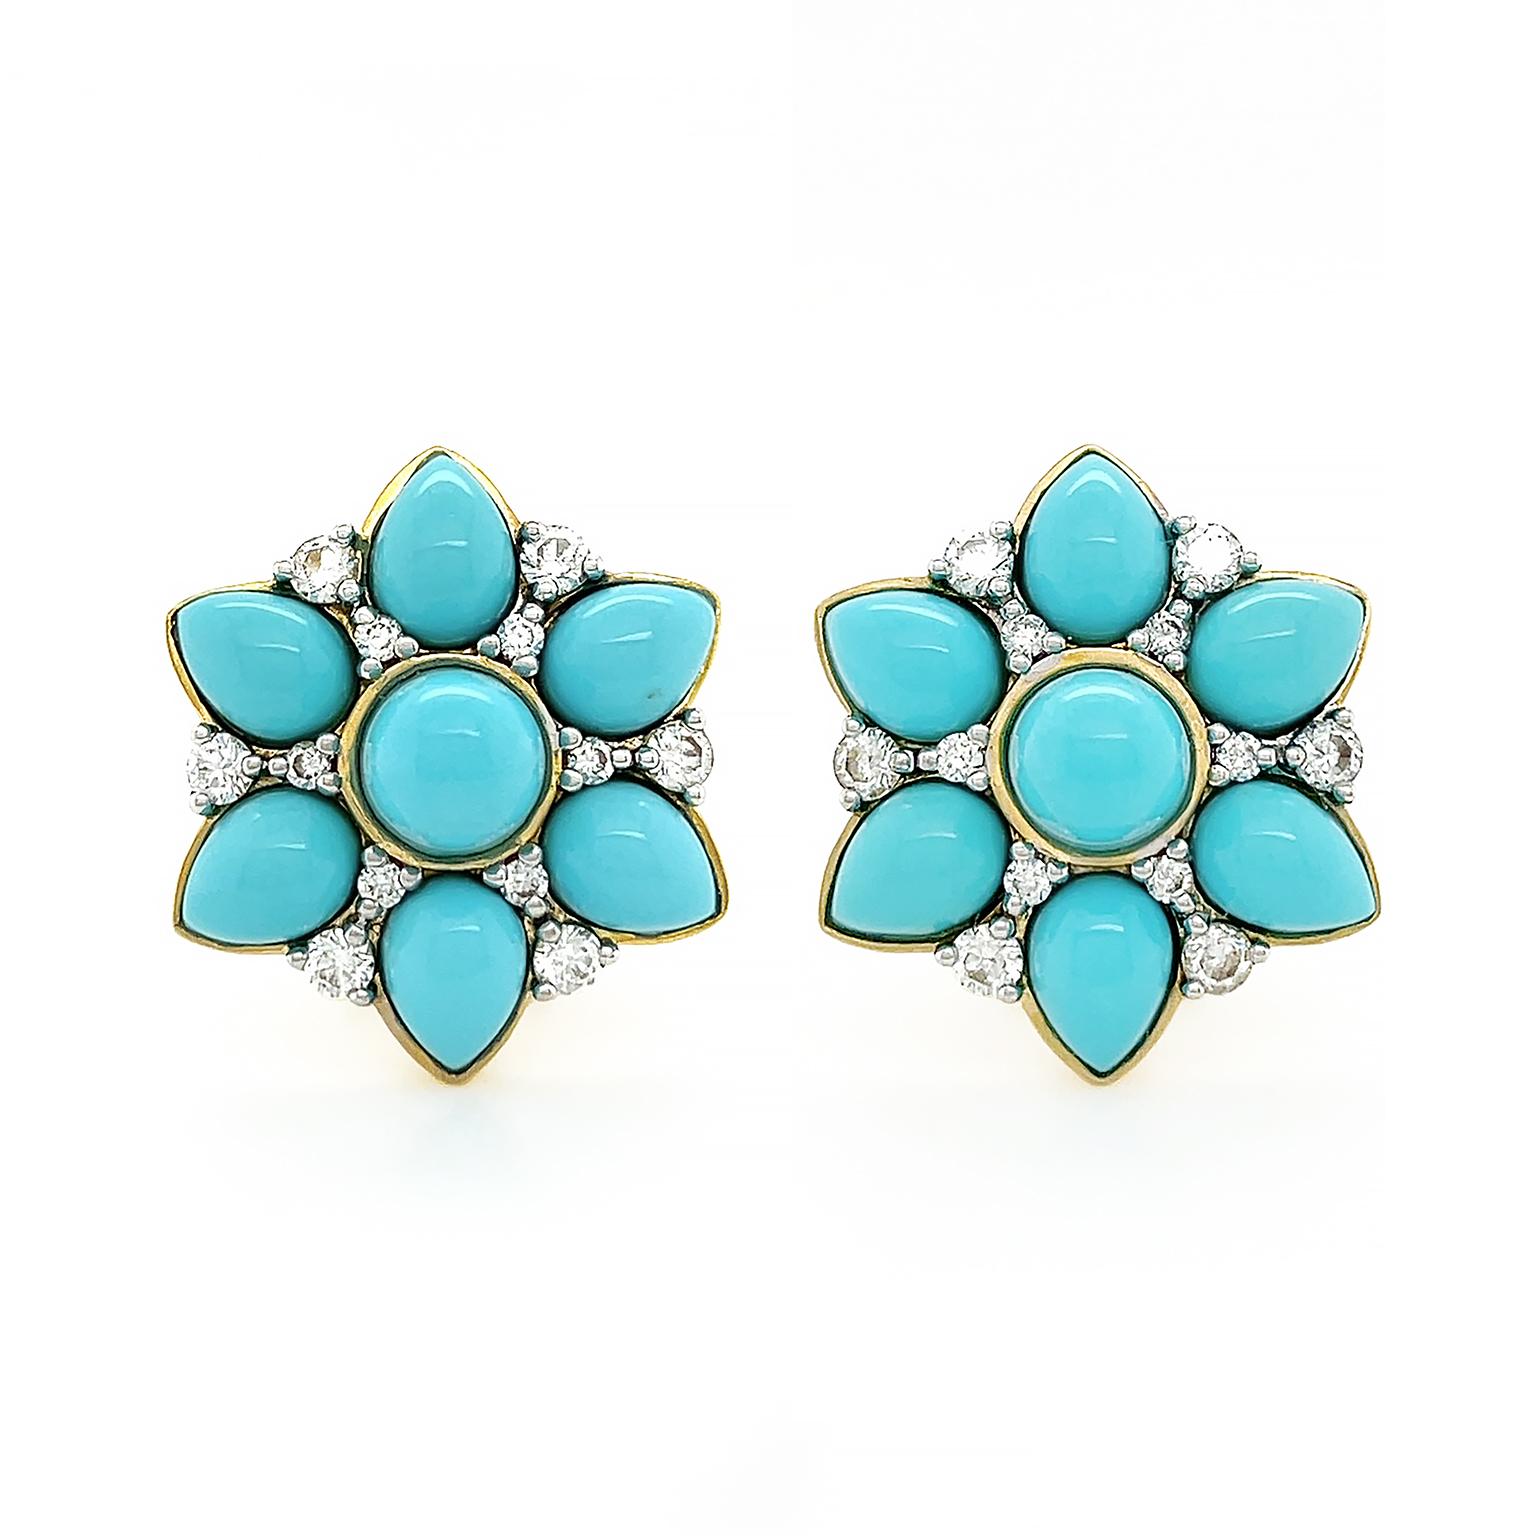 Lustrous turquoise depicts a floral motif against the flicker of diamonds for these earrings. A round carving of the gem is surrounded by six pear shapes to form a flower. In between the pear cuts are E color VS1 diamonds, the second to highest